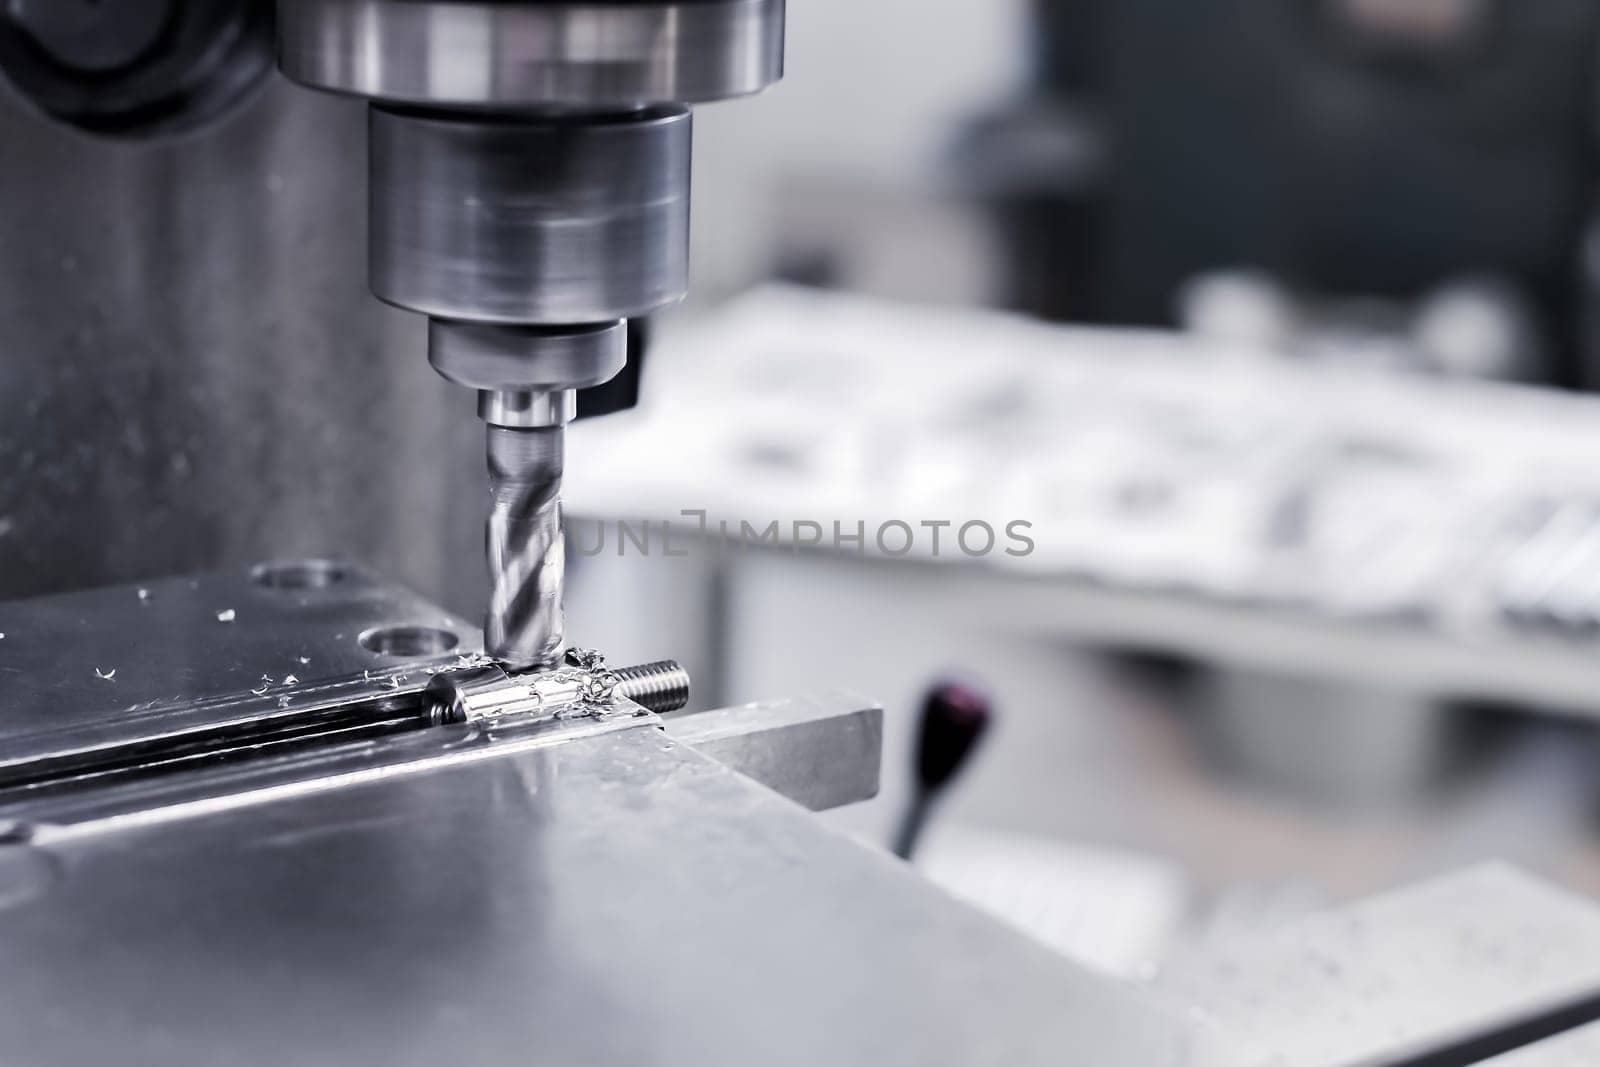 In production, a drill drills into an aluminum steel plate with a drill. A metal drill makes holes in a steel workpiece on an industrial machine. Metalworking industry. Close-up.